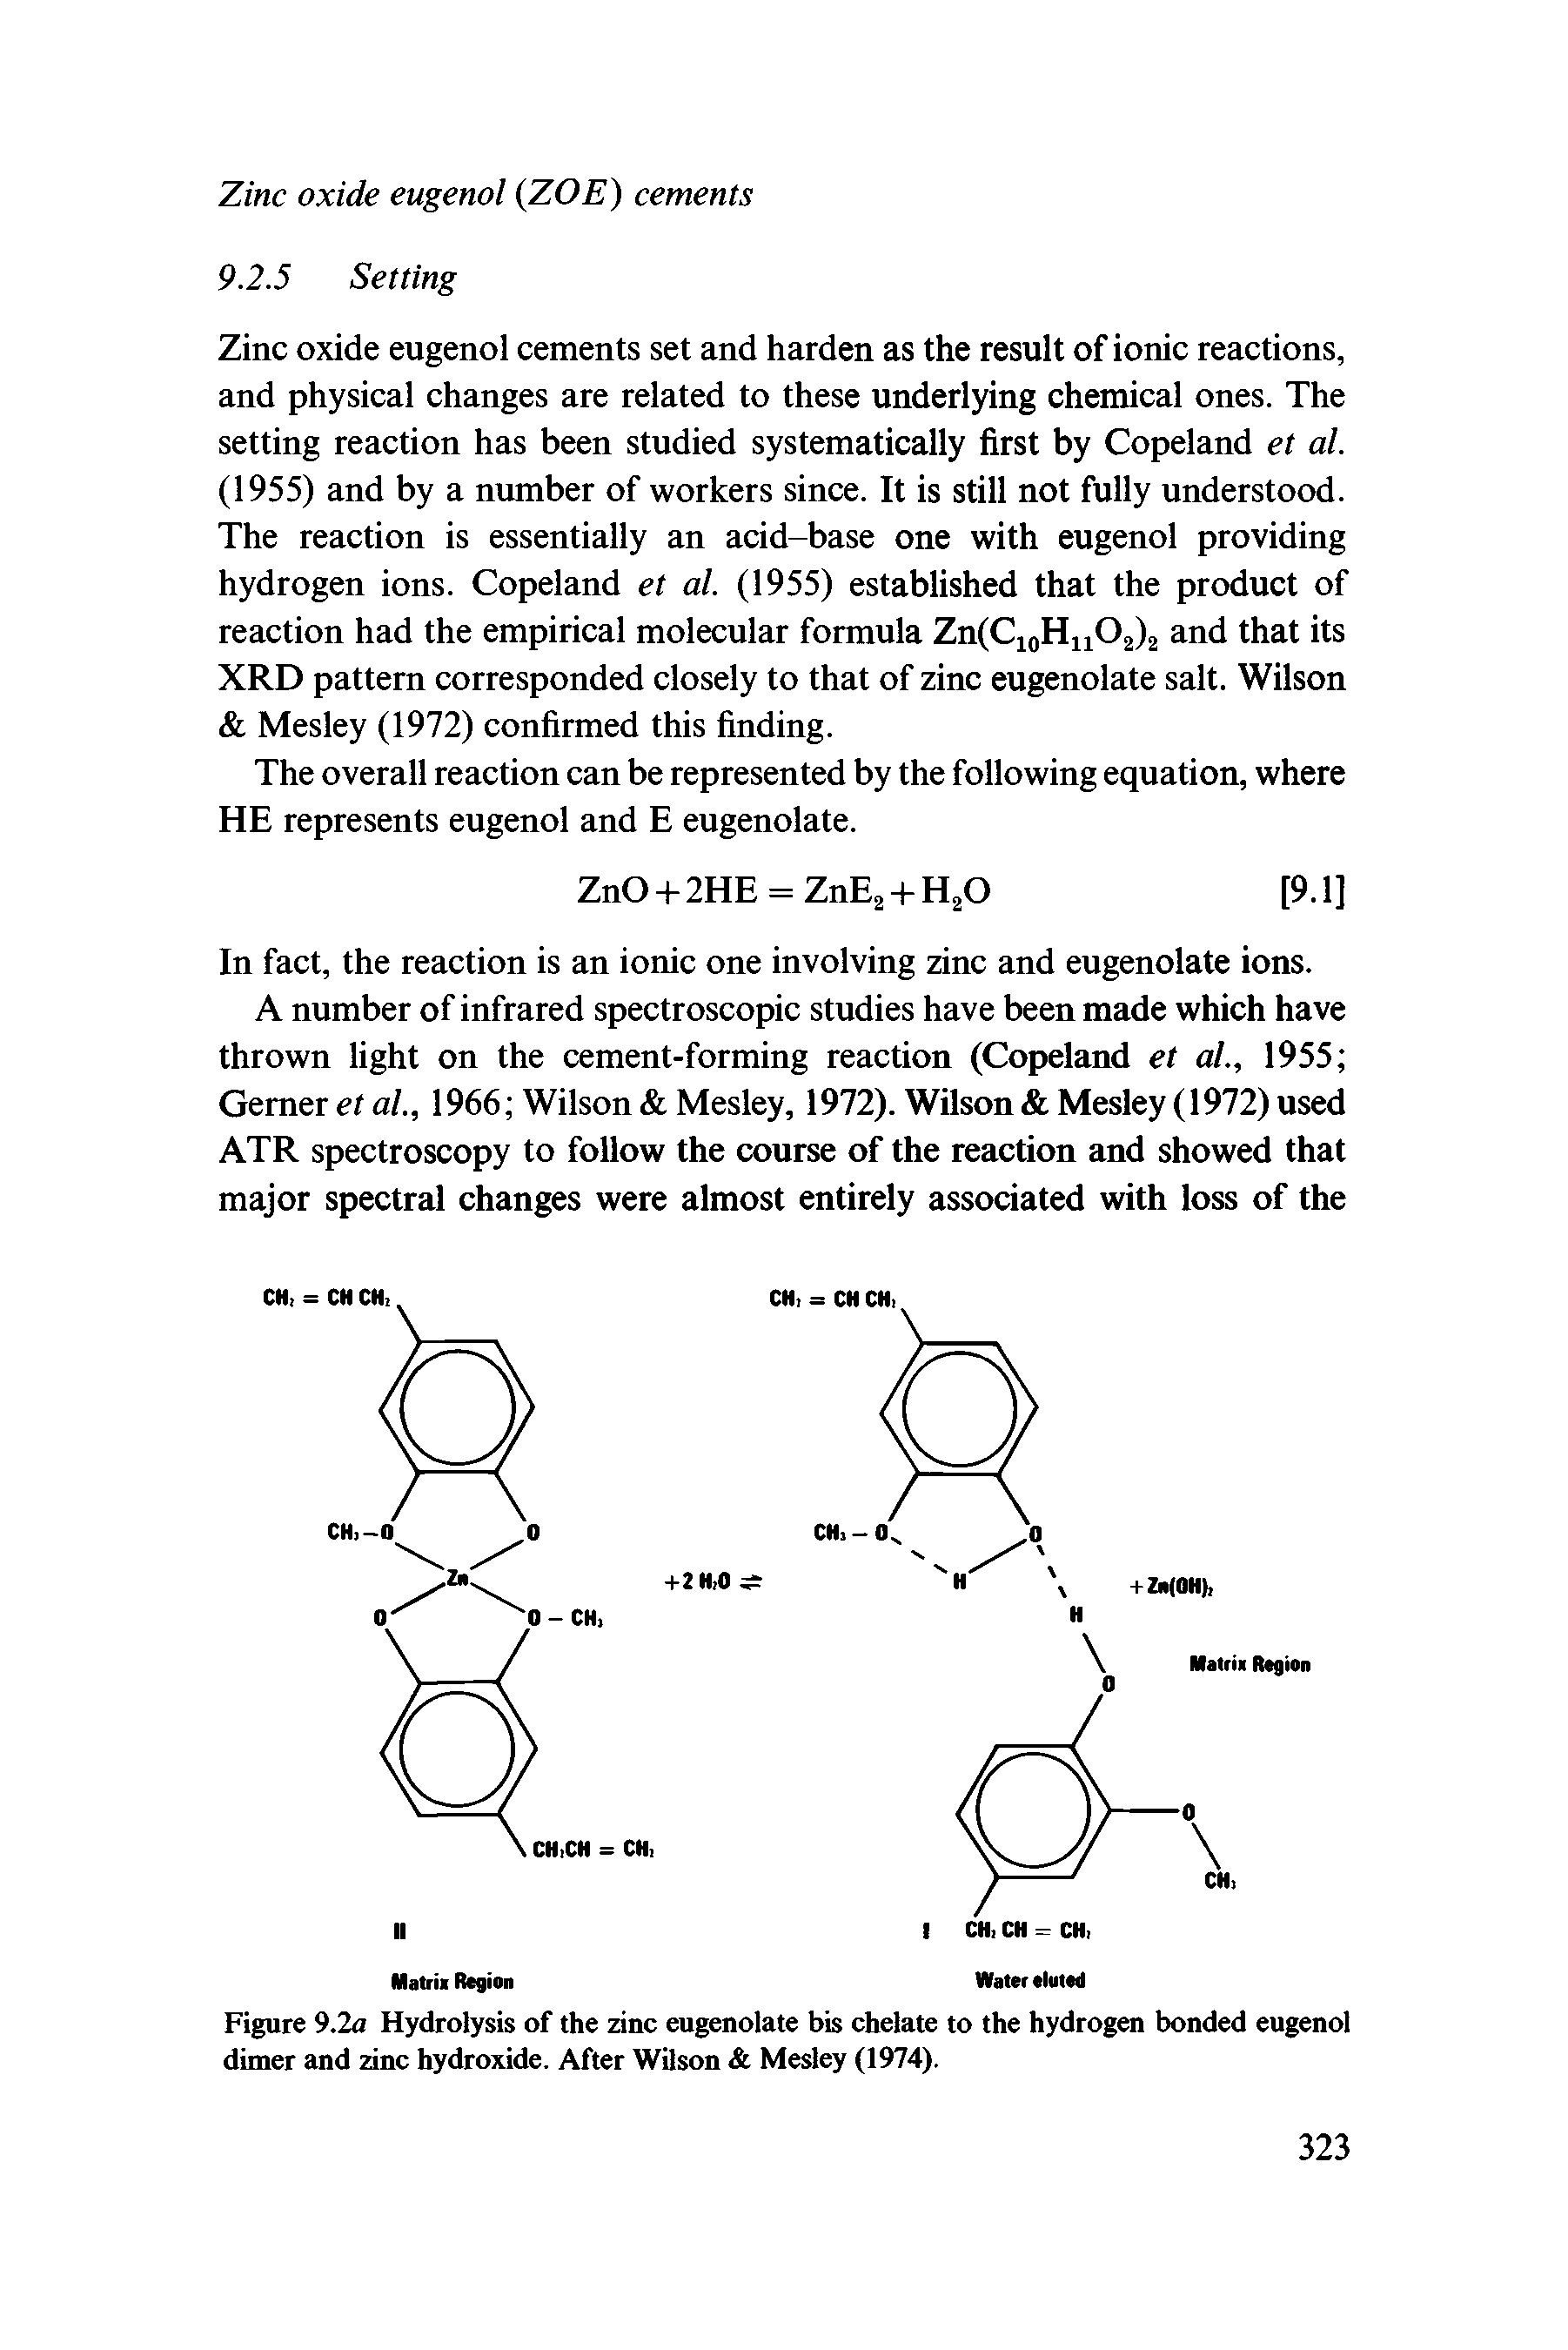 Figure 9J2a Hydrolysis of the zinc eugenolate bis chelate to the hydrogen bonded eugenol dimer and zinc hydroxide. After Wilson Mesley (1974).